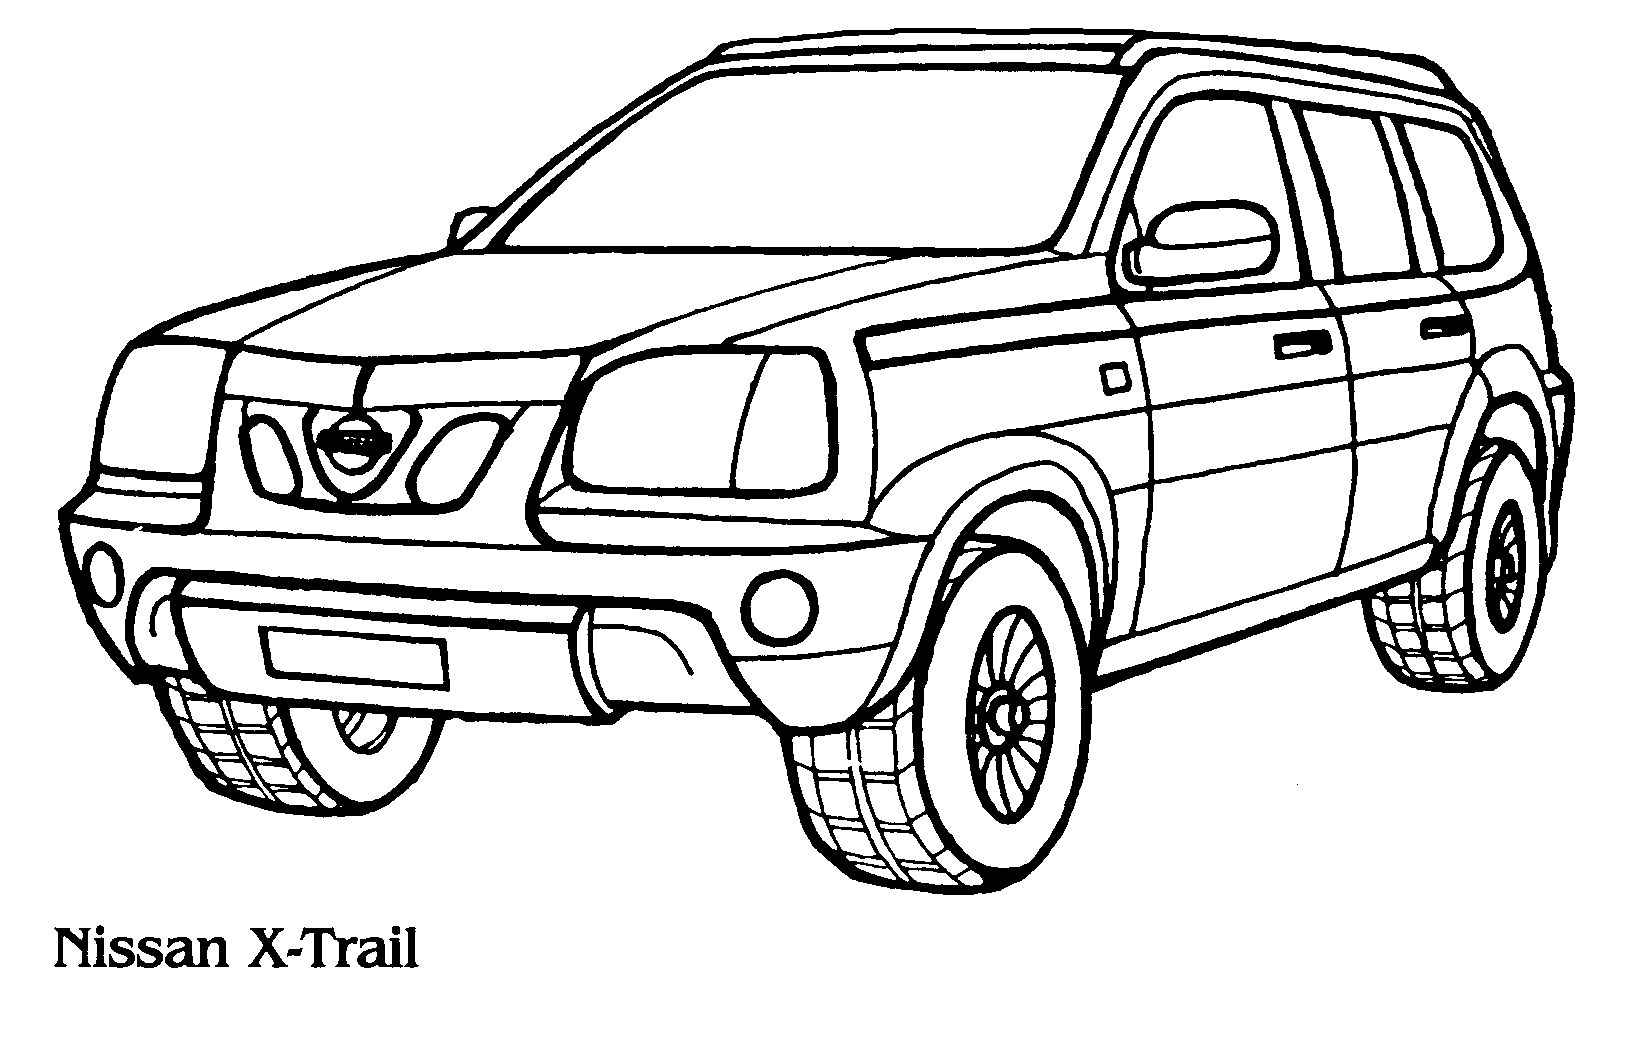 Coloring page - Nissan X-Trail